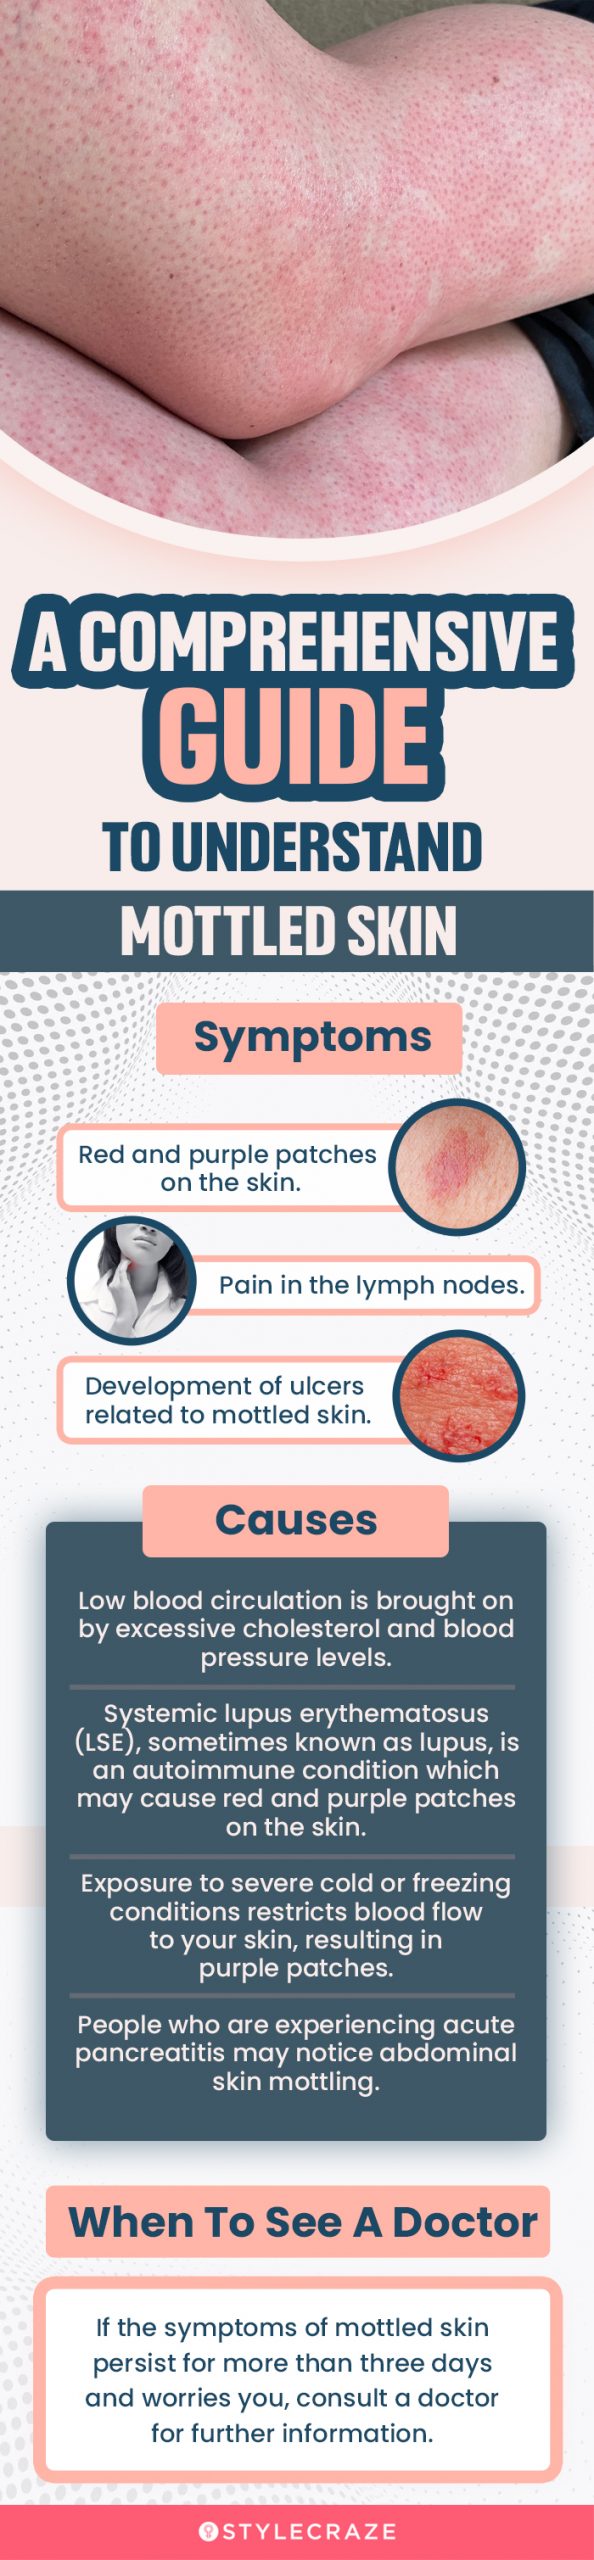 a comprehensive guide to understanding mottled skin (infographic)